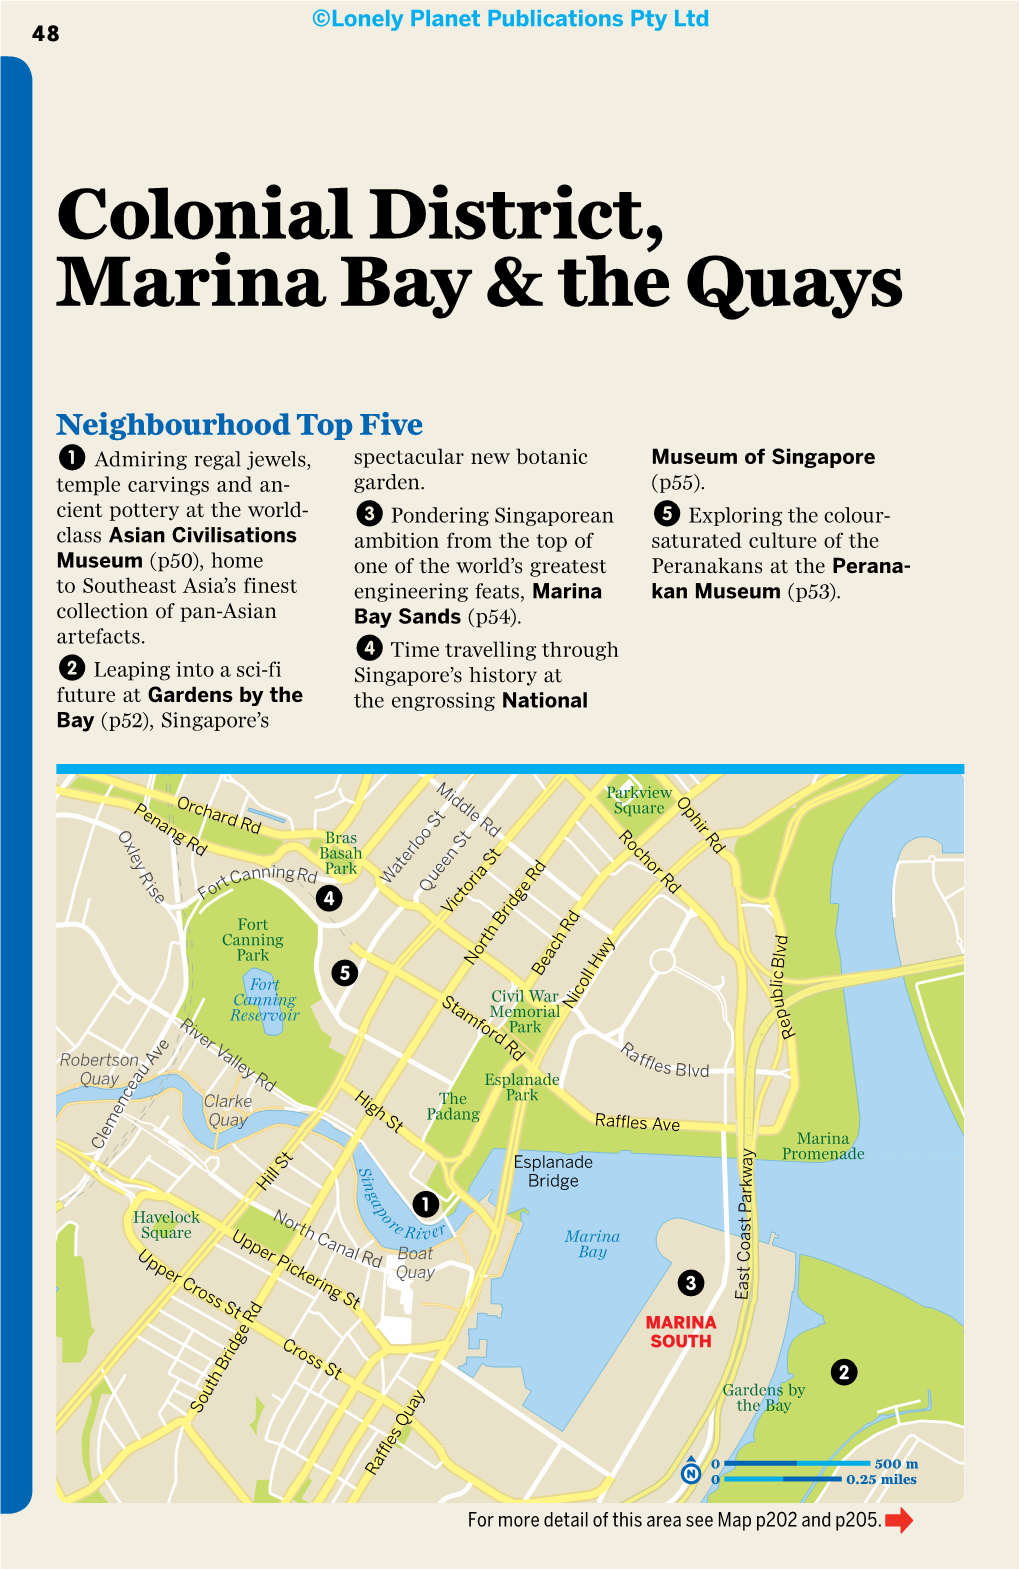 Colonial District, Marina Bay & the Quays